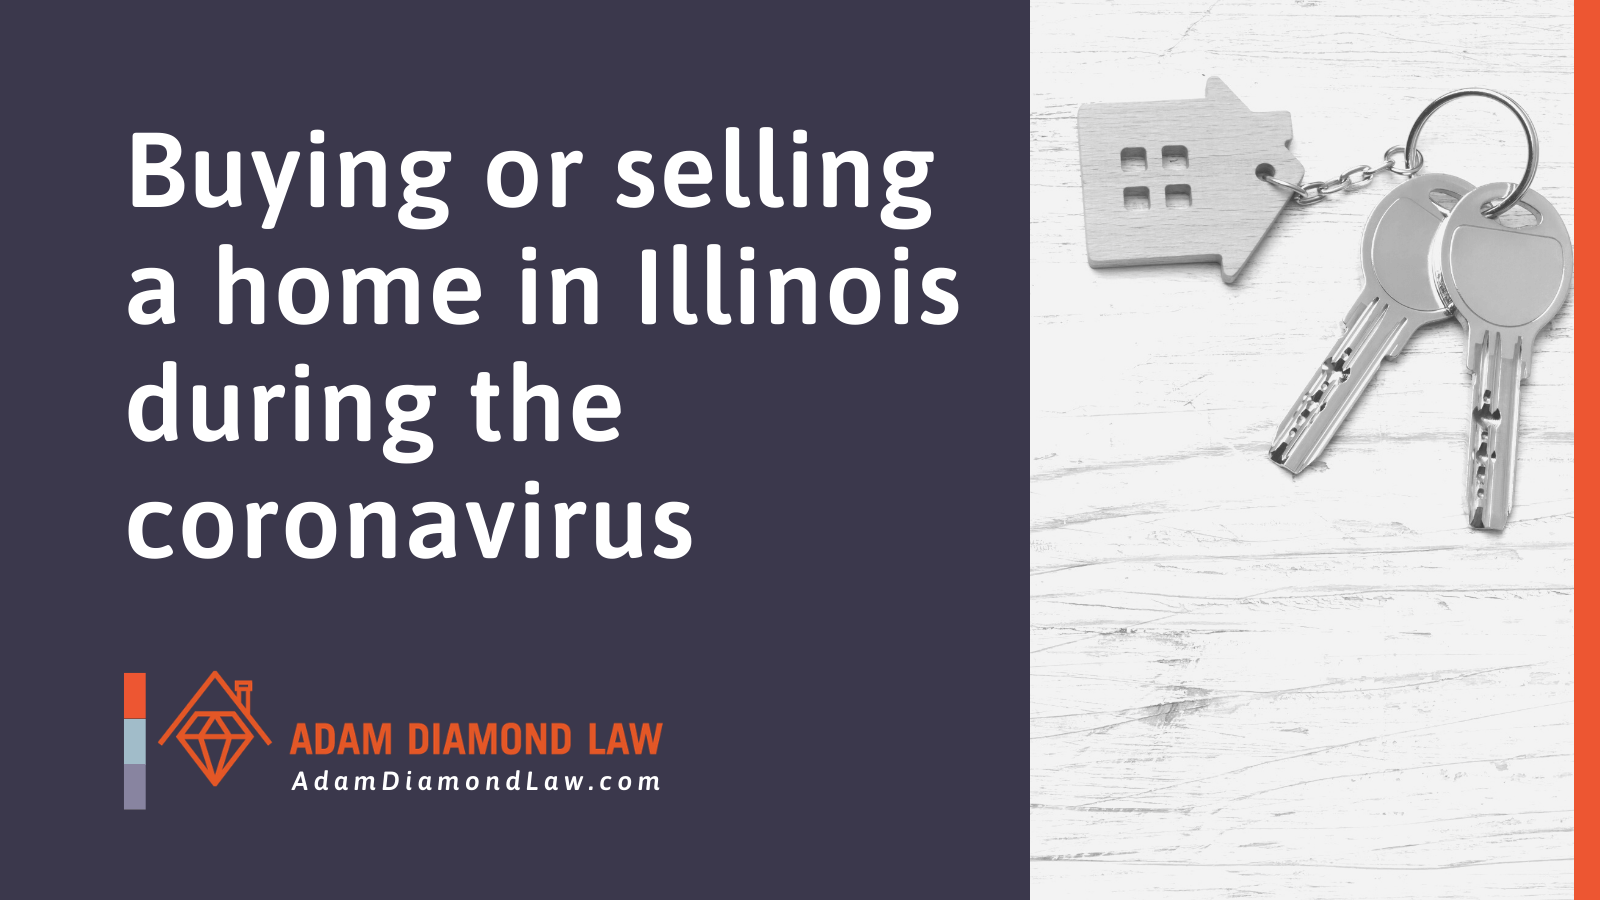 Buying or selling a home in Illinois during the coronavirus - Adam Diamond Law | McHenry, IL Residential Real Estate Lawyer